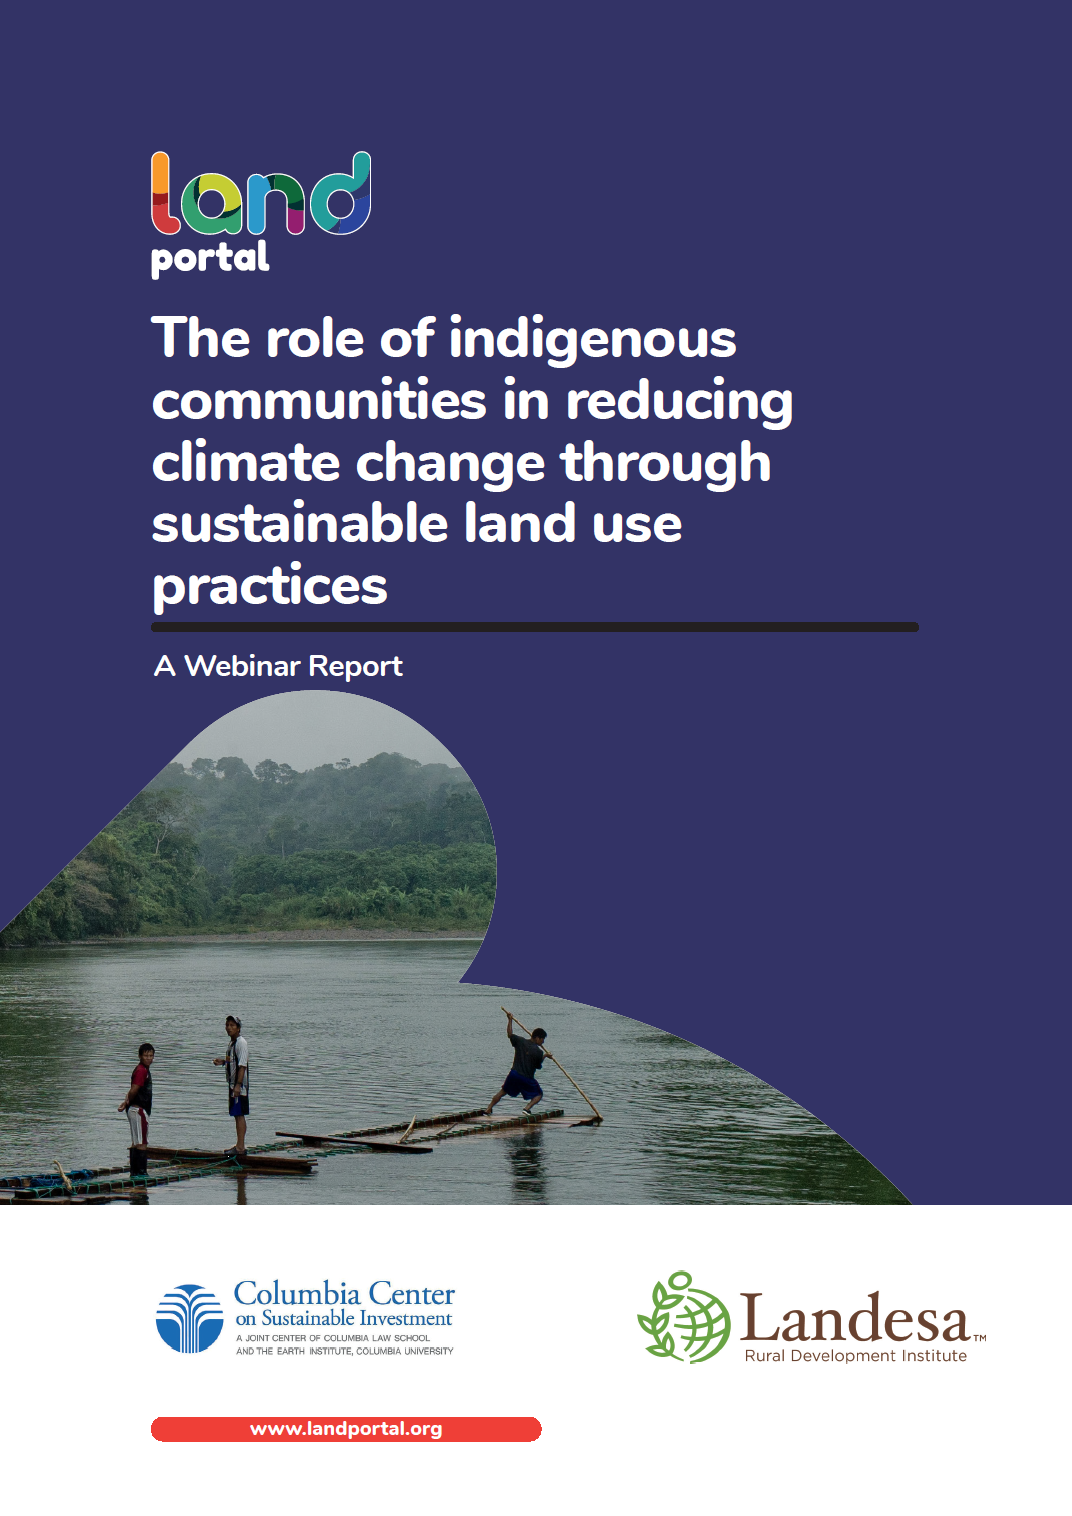 The role of indigenous communities in reducing climate change through sustainable land use practices